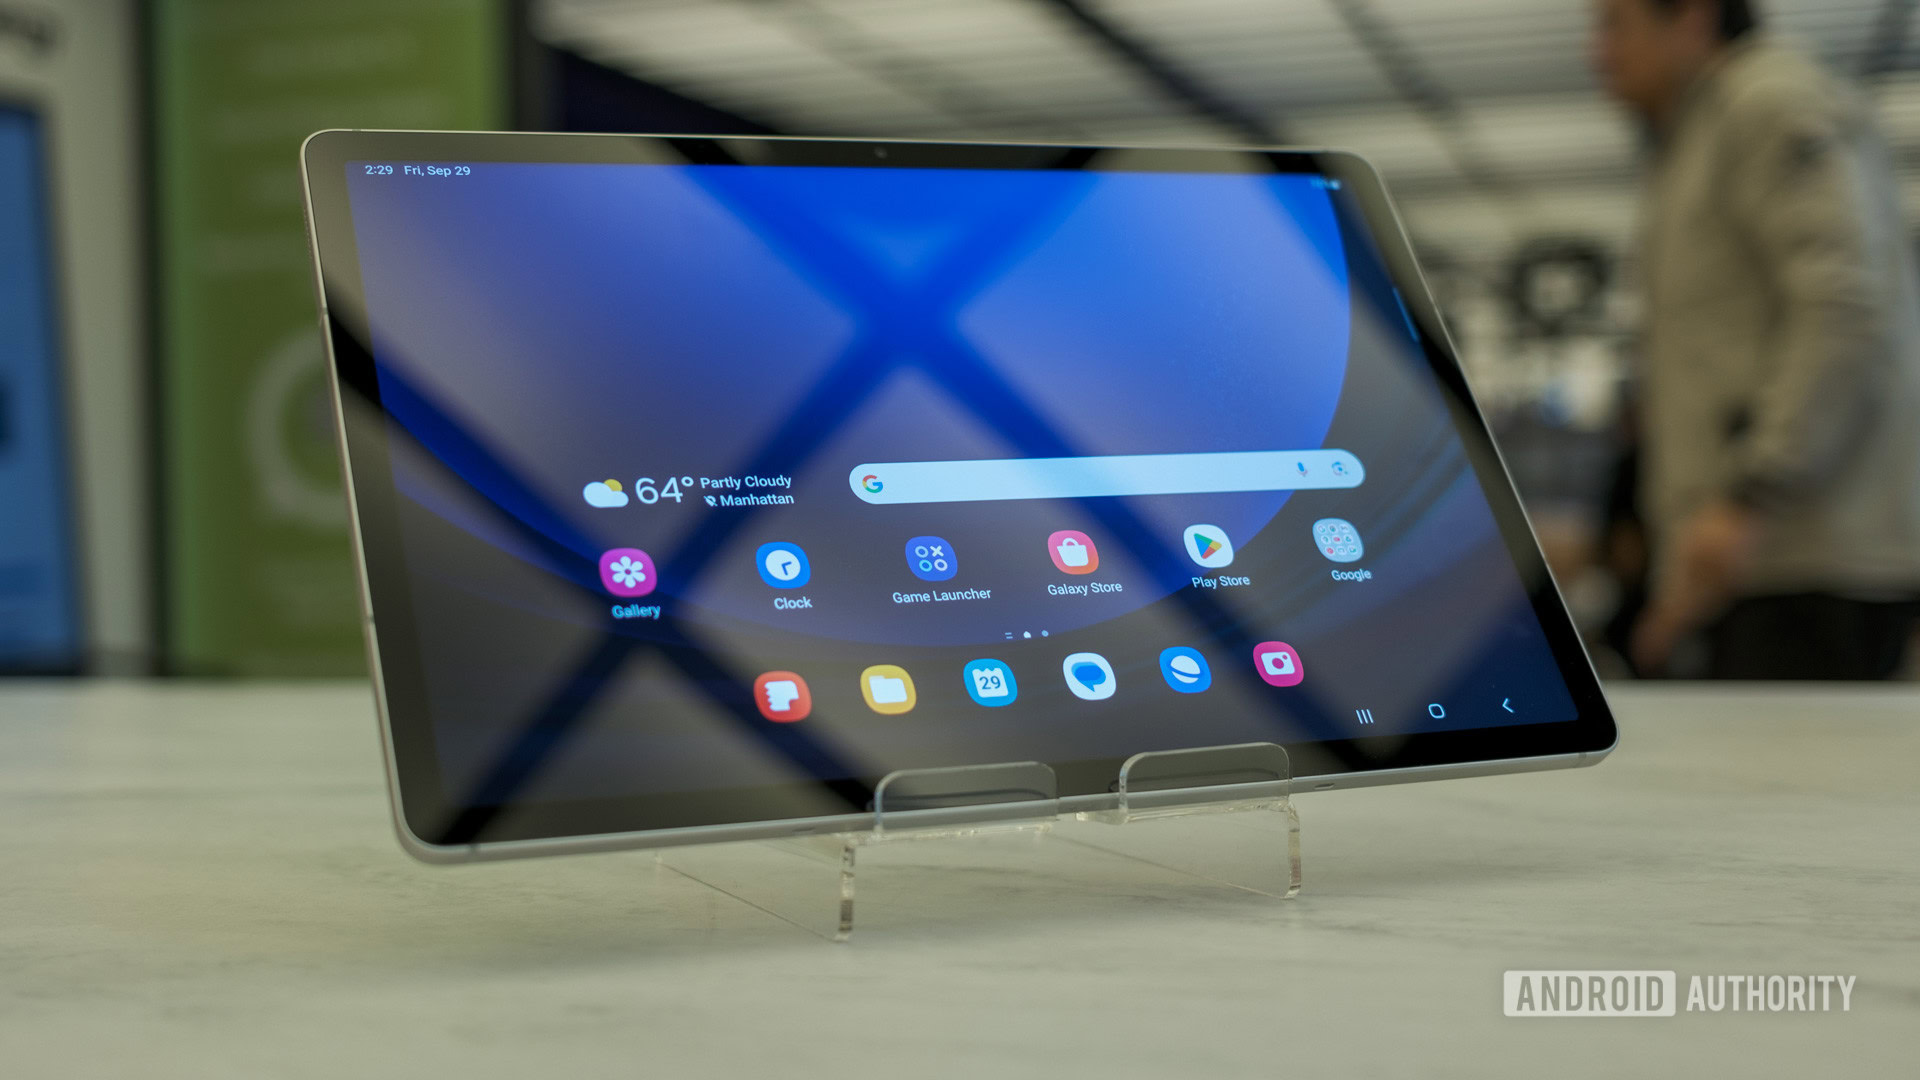 The Galaxy Tab S9 Ultra looks like one of 2023's most exciting